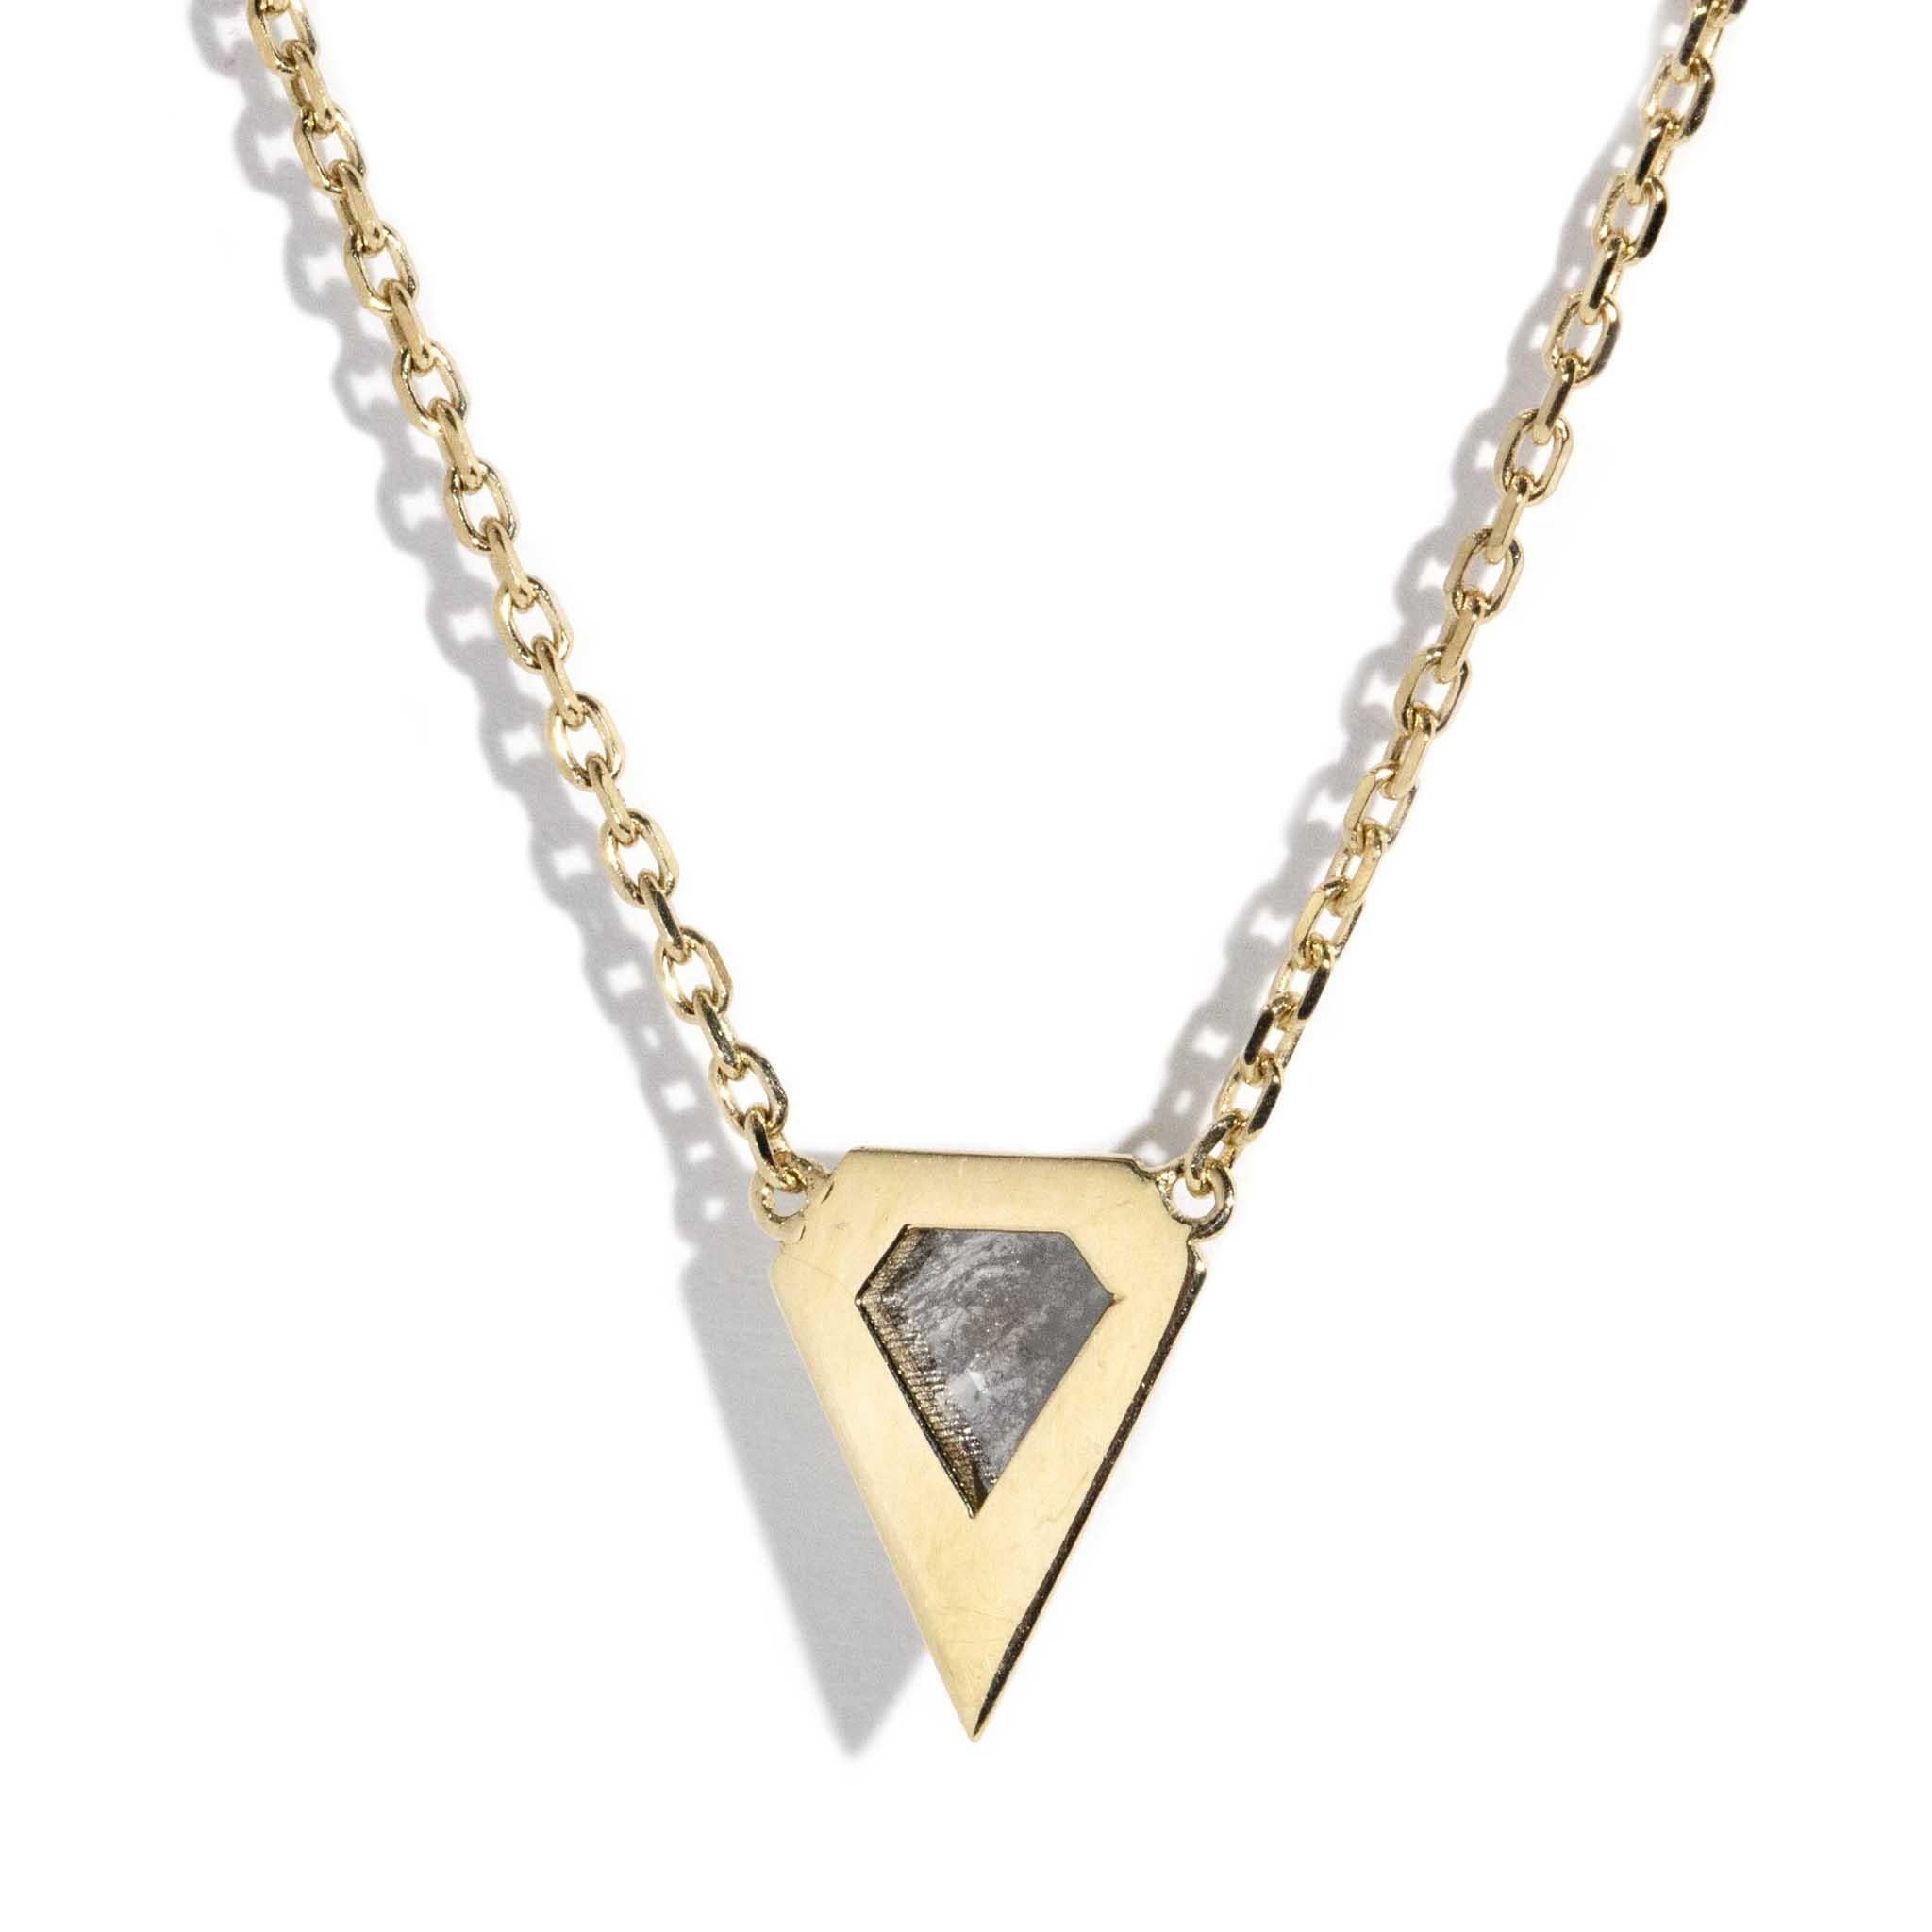 Contemporary Salt & Pepper Diamond Kite Shaped Necklet 9 Carat Yellow Gold For Sale 2